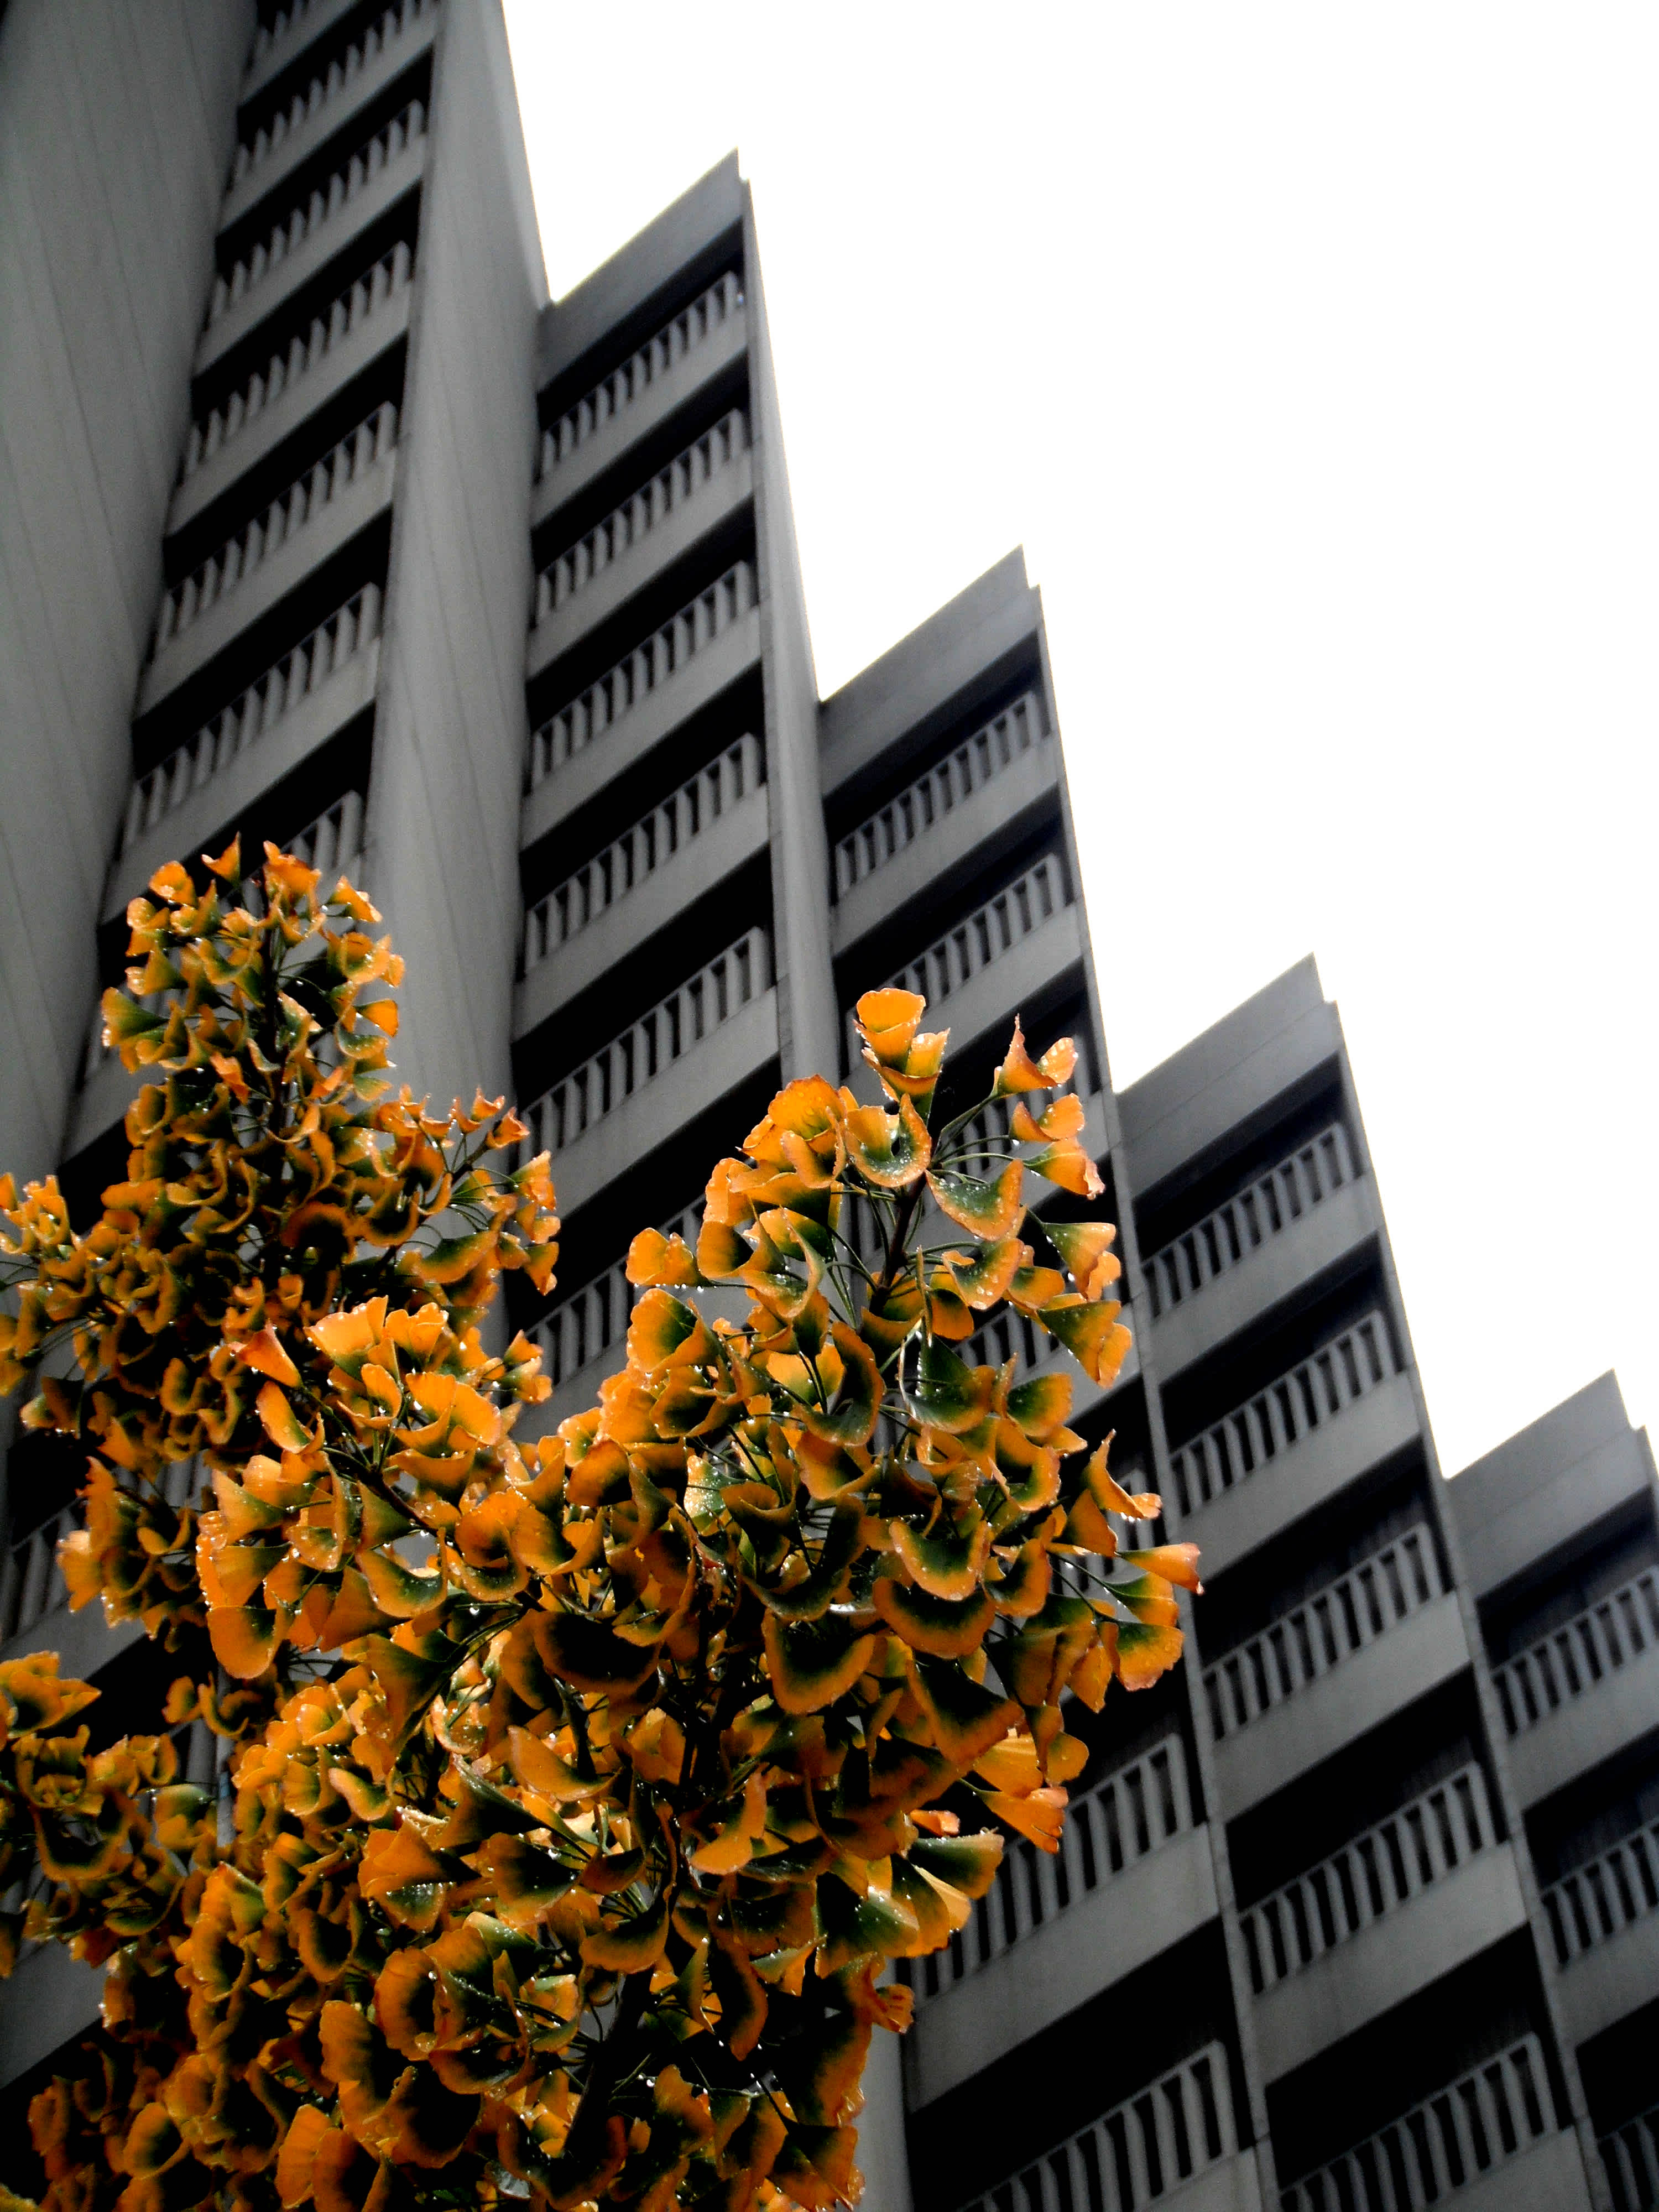 Yellow and green leaves in front of a black and white building in Embarcadero, San Francisco, California.